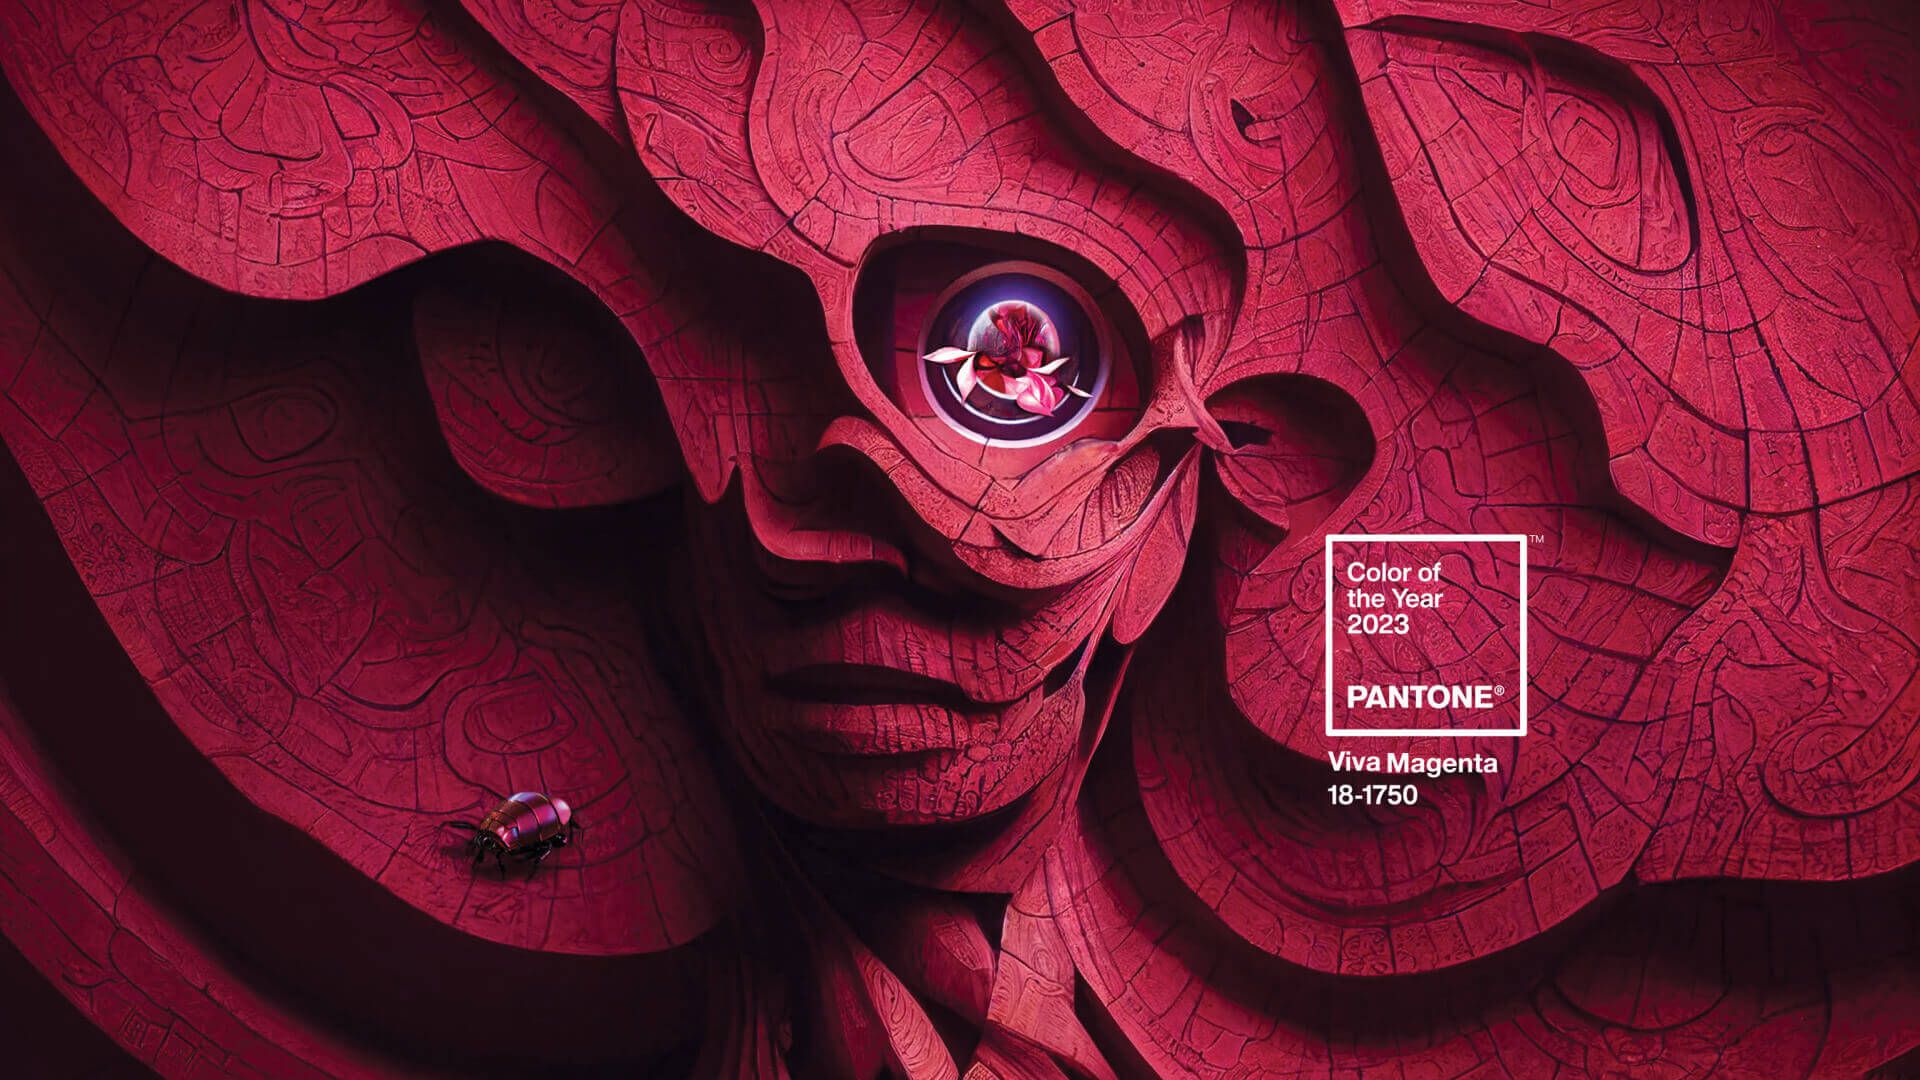 Pantone welcomes the world to the Magentaverse with Viva Magenta